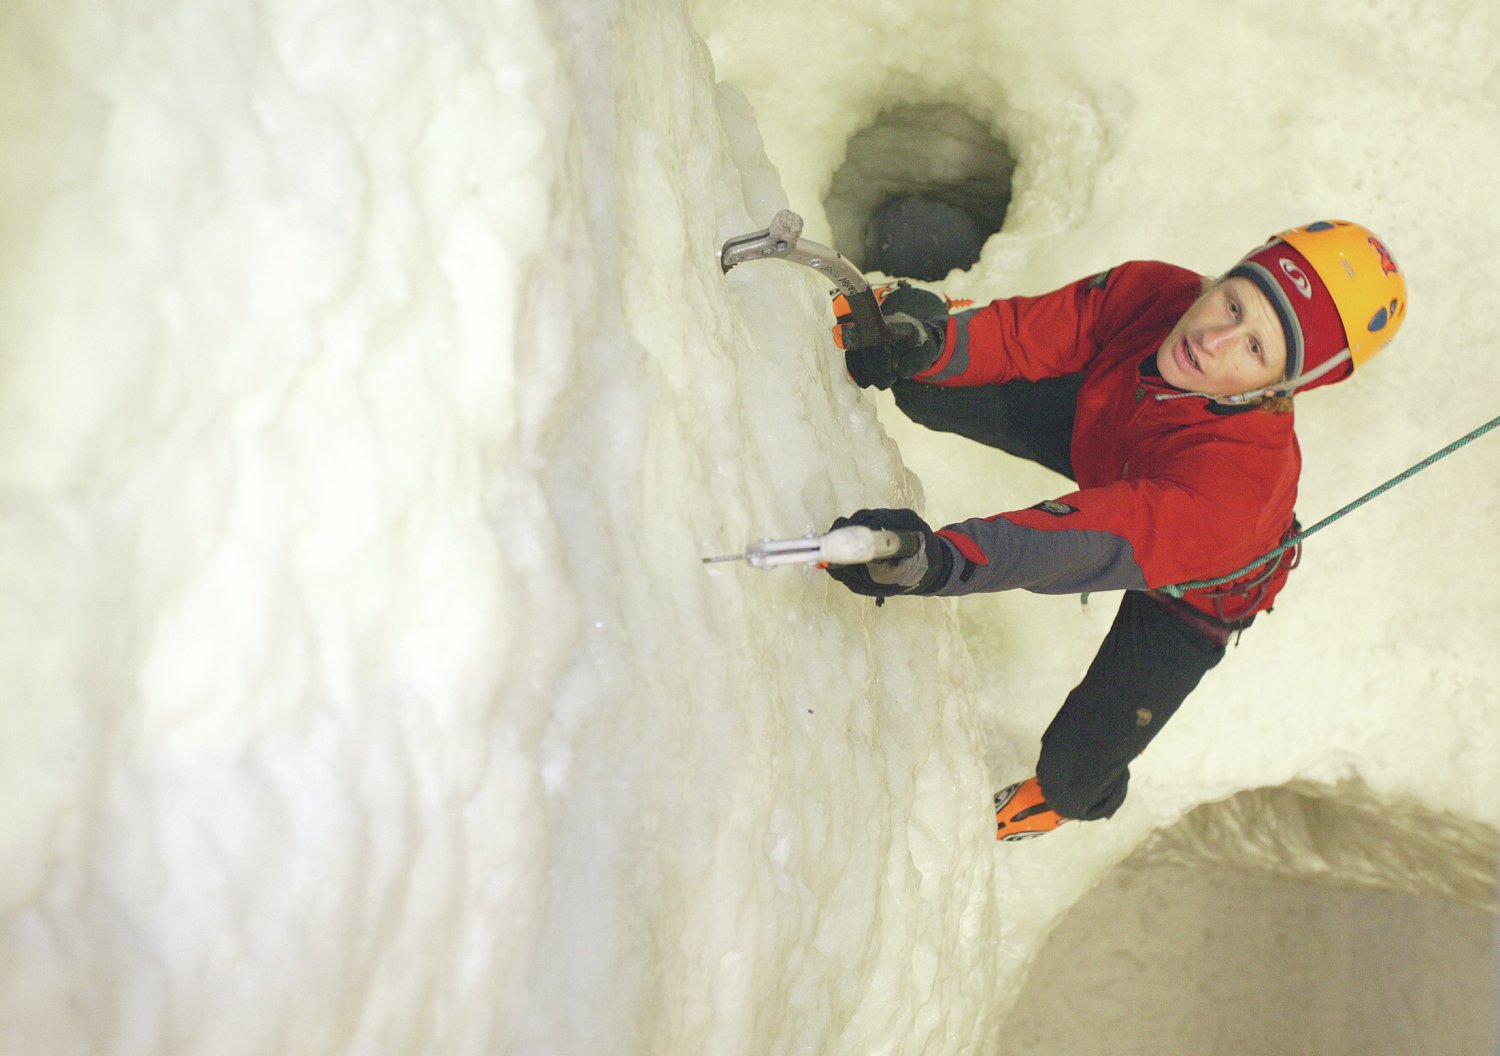 Ice Climbing for Two Gift Experience